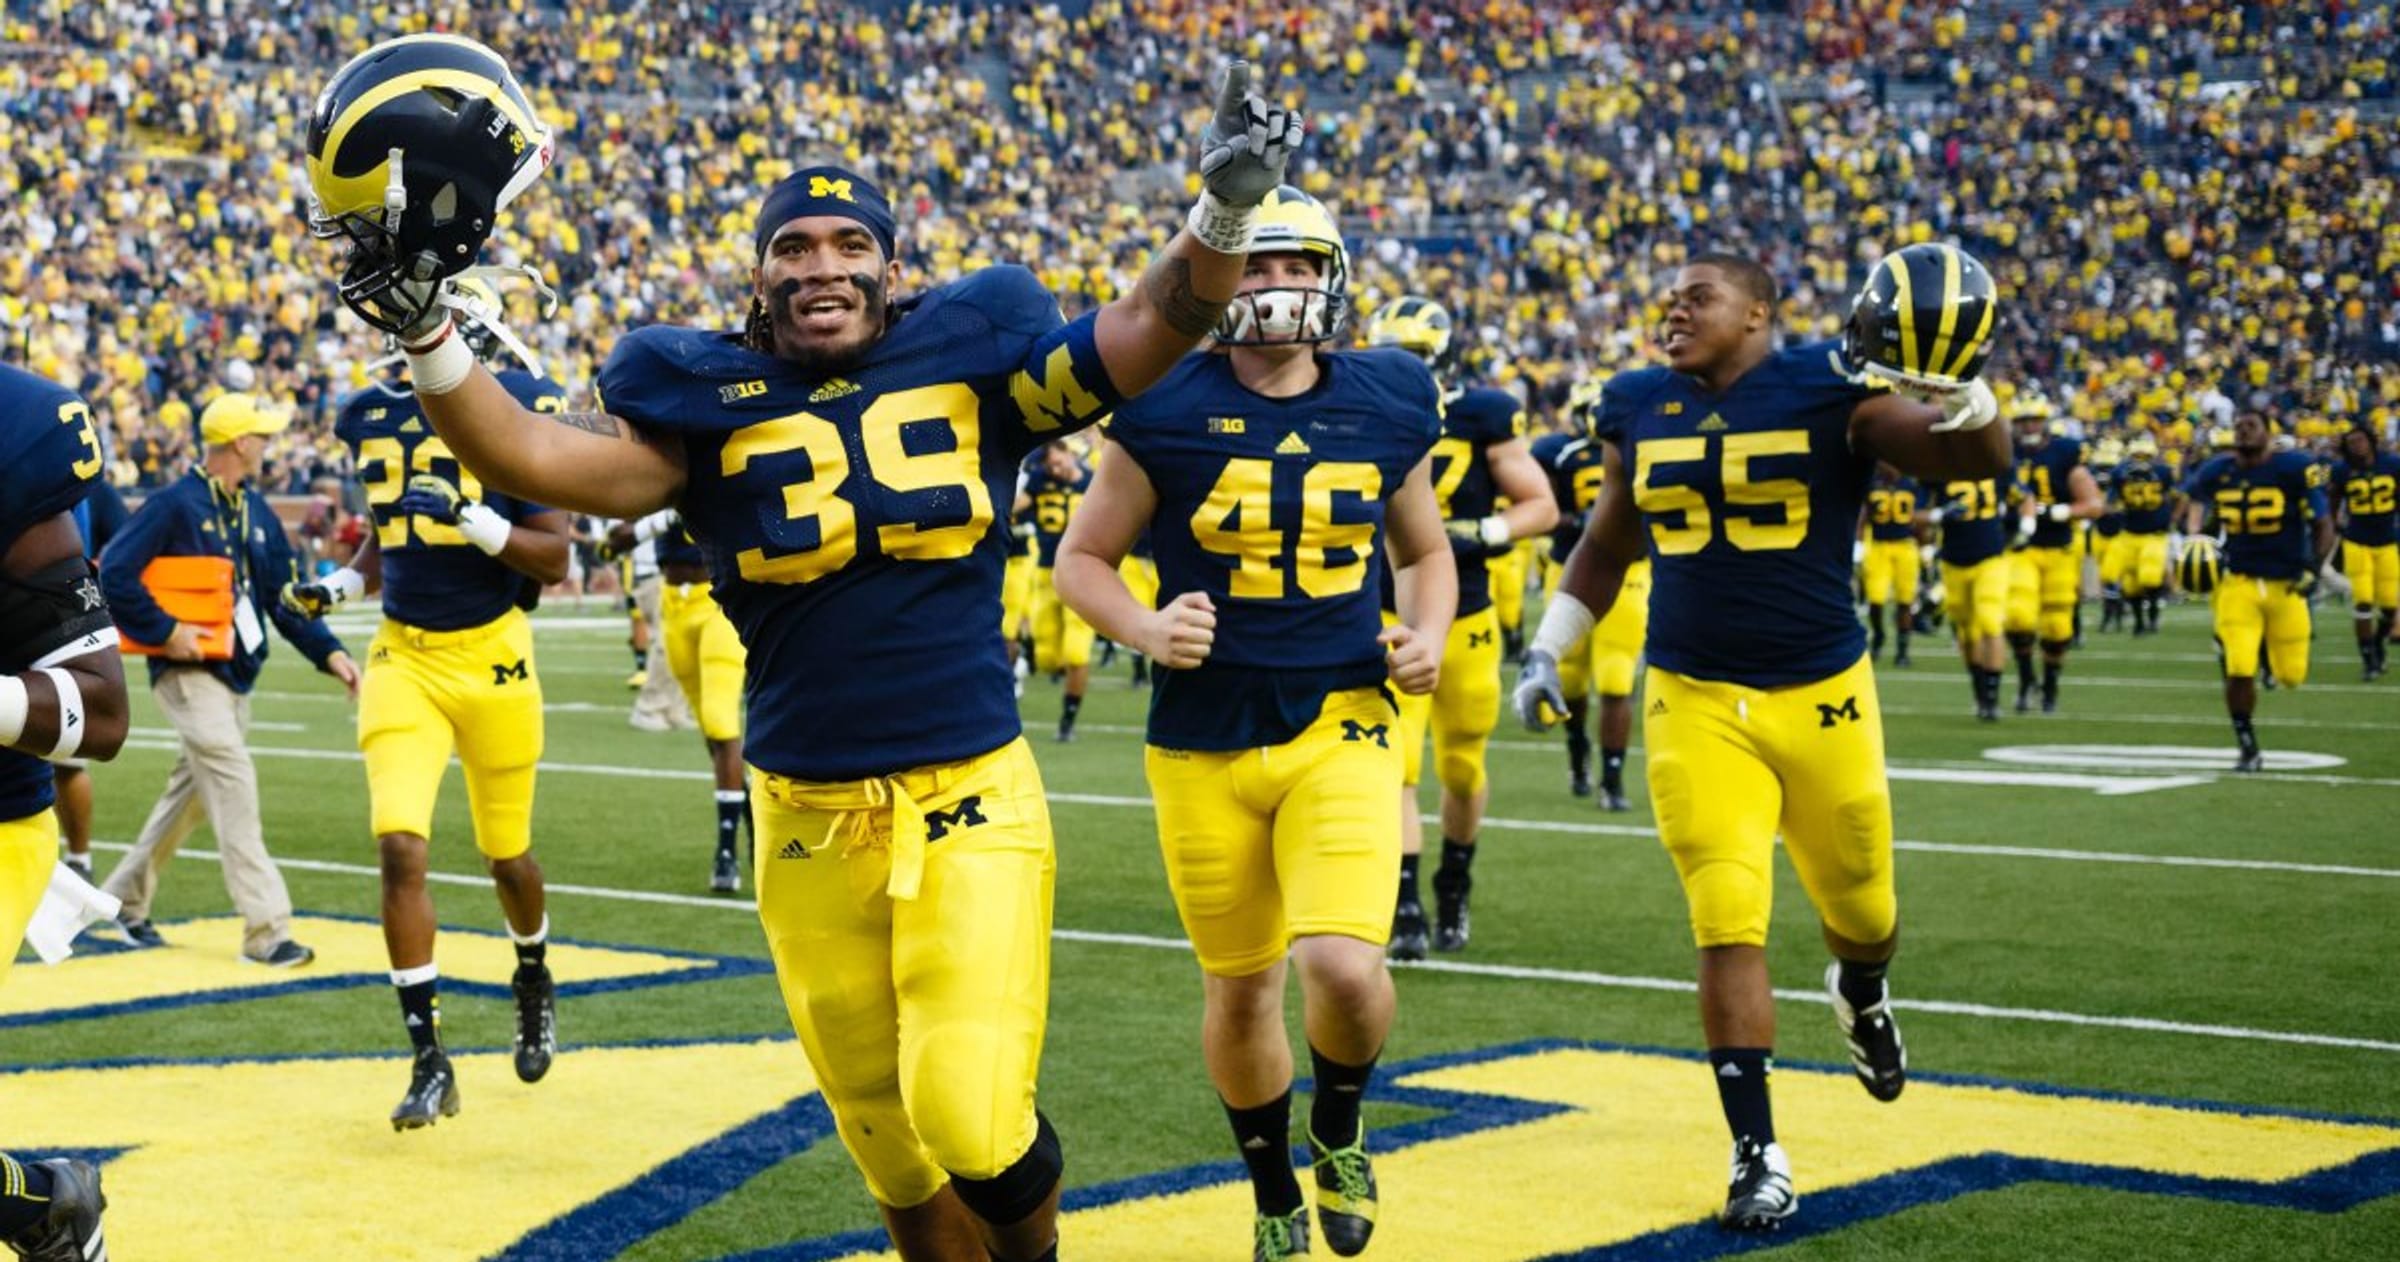 Best Michigan Wolverines Football Players of All Time